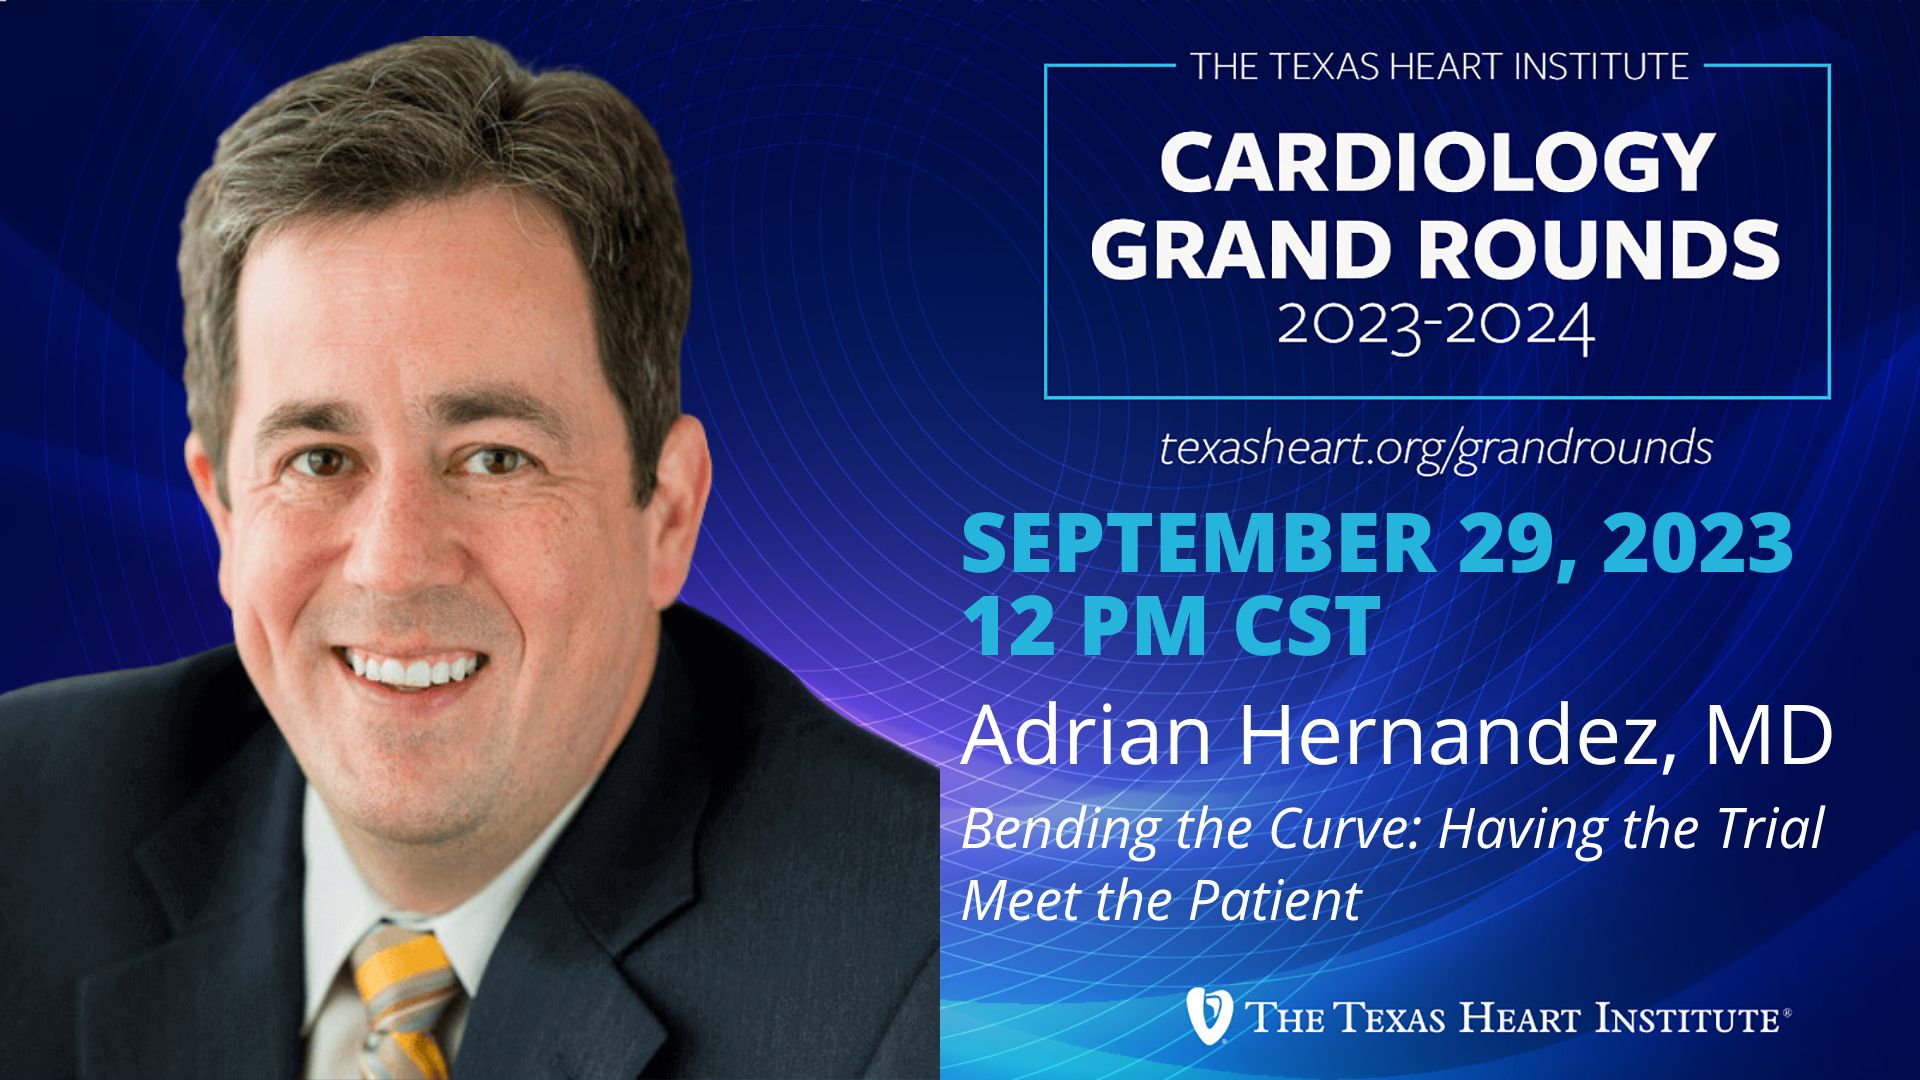 Adrian F. Hernandez, MD | Bending the Curve: Having the Trial Meet the Patient 